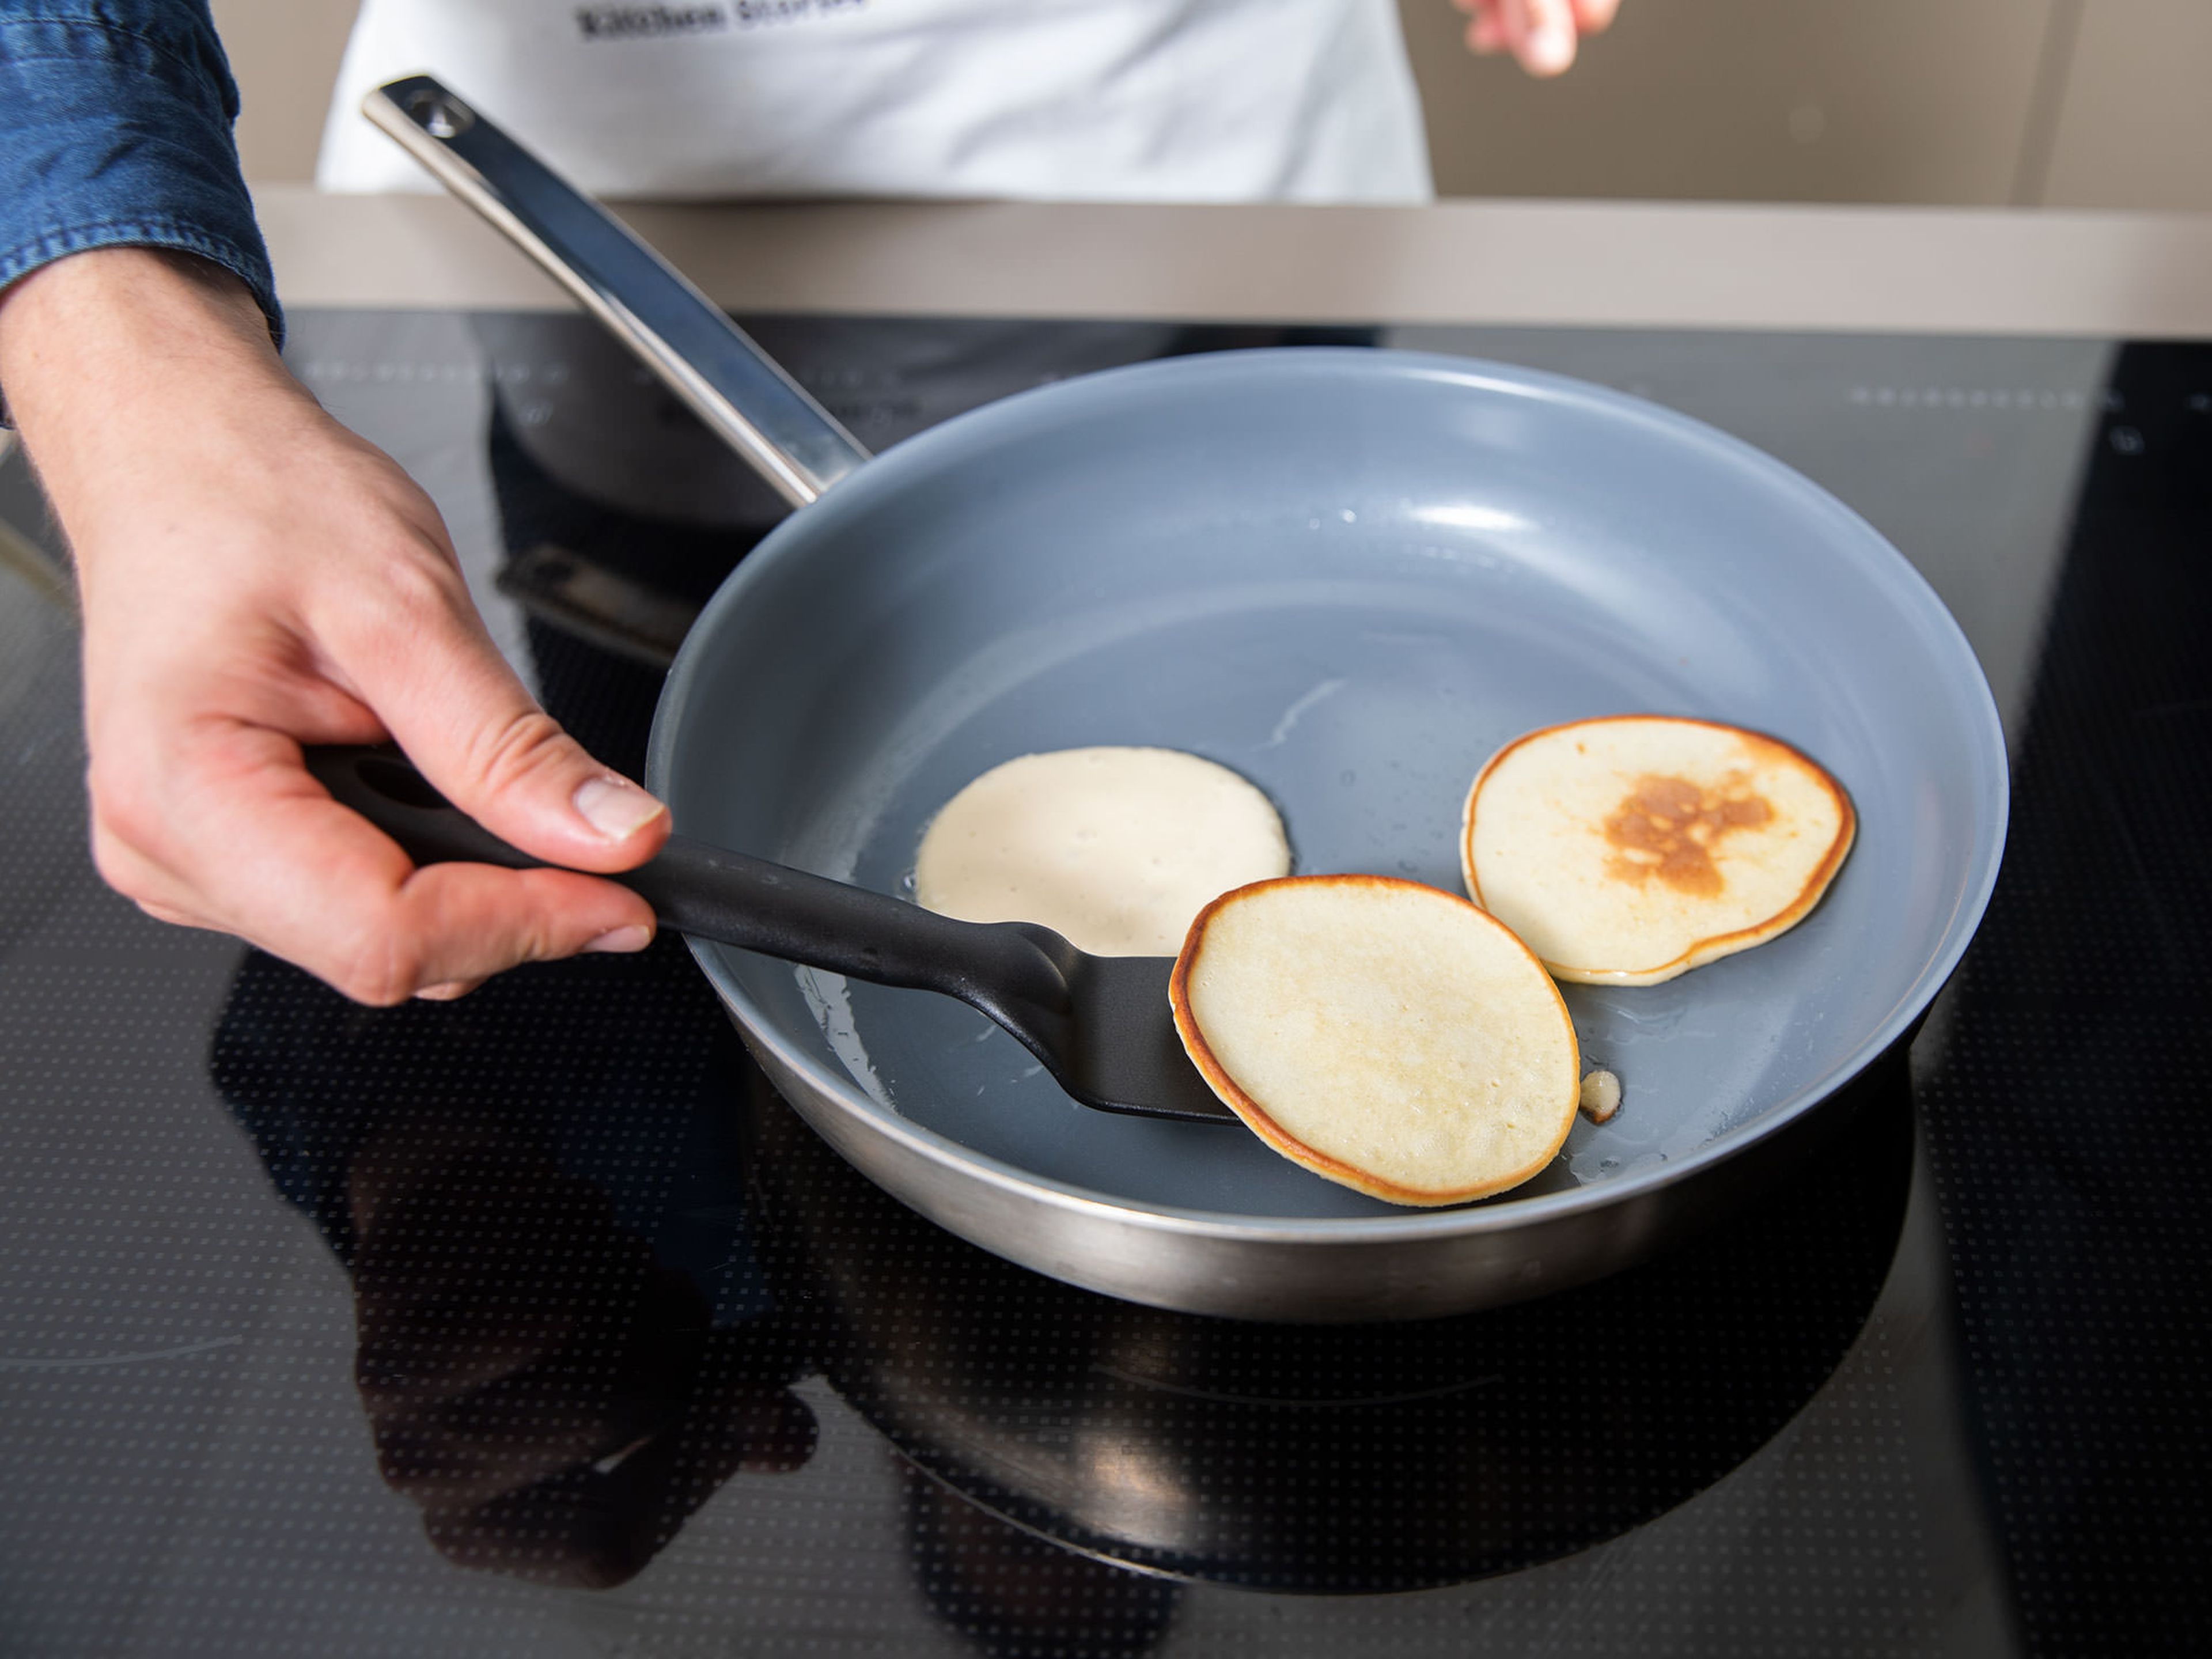 Heat oil in a pan over medium heat. Using a spoon, add dough to pan and fry oladi for approx. 1 – 2 min. on both sides, or until golden brown and cooked through. Repeat with remaining dough.